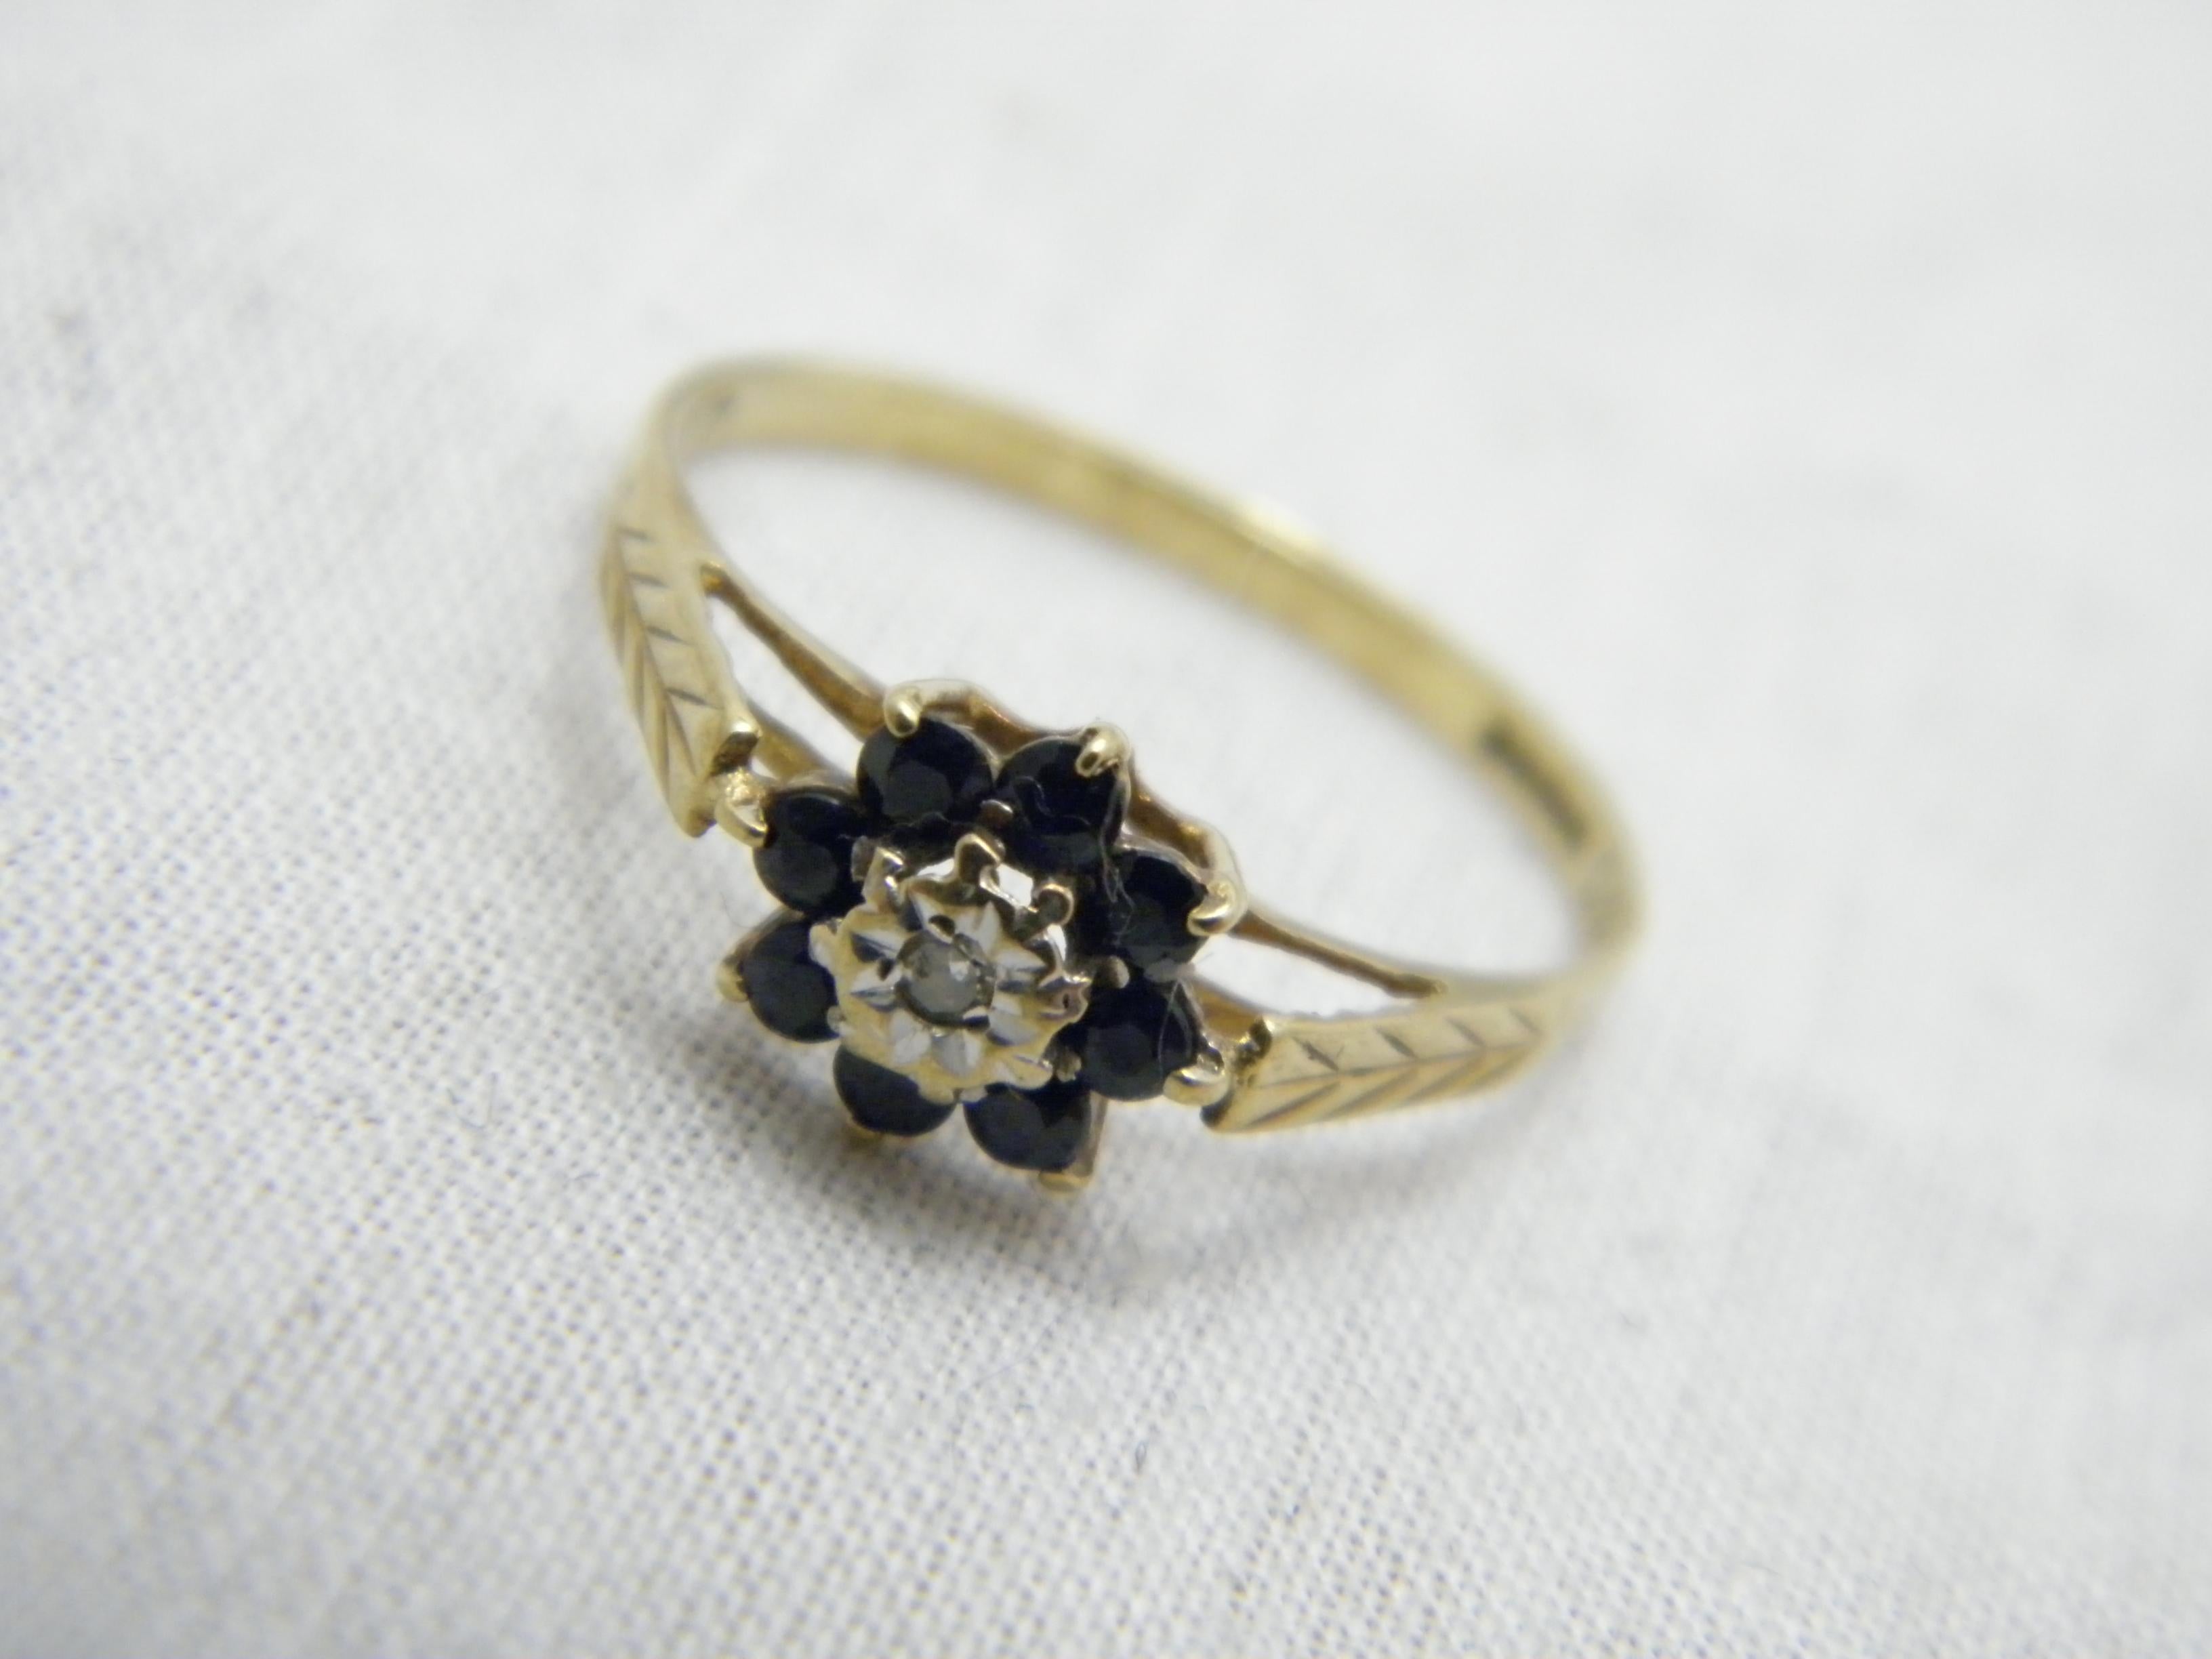 If you have landed on this page then you have an eye for beauty.

On offer is this gorgeous

9CT GOLD SAPPHIRE AND DIAMOND CLUSTER ENGAGEMENT RING

DETAILS
Material: 9ct 375/000 Yellow Gold
Style: Art Deco style daisy cluster gemstone